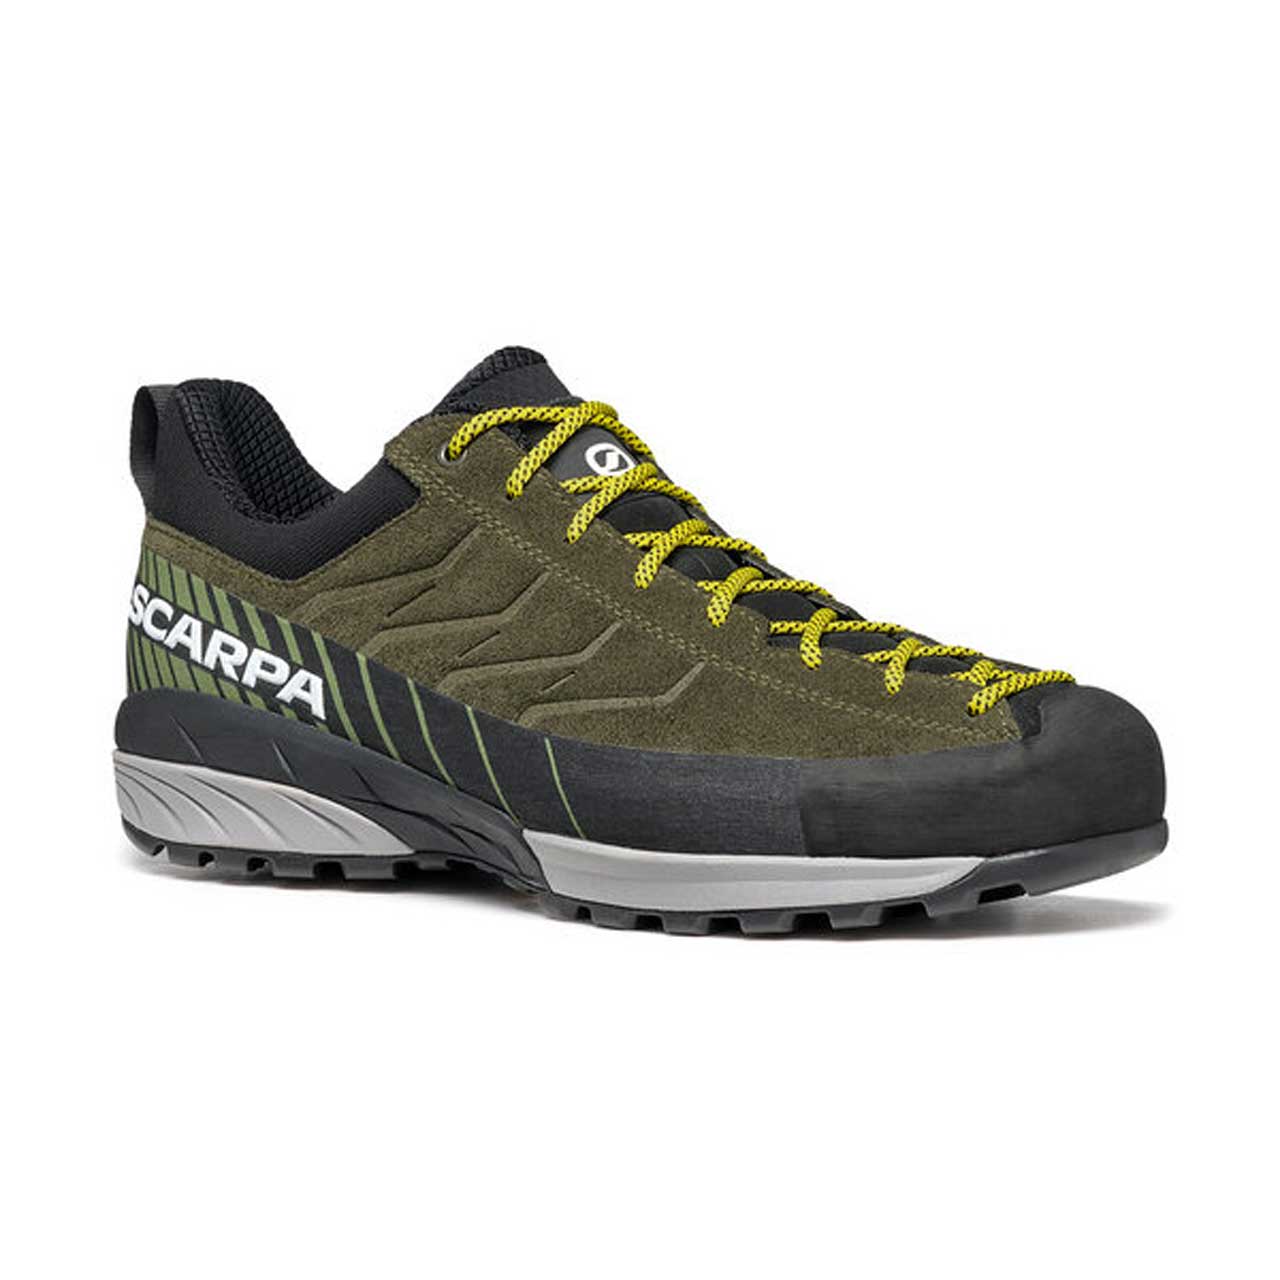 Scarpa Mescalito - Thyme Green/Forest, 44.5